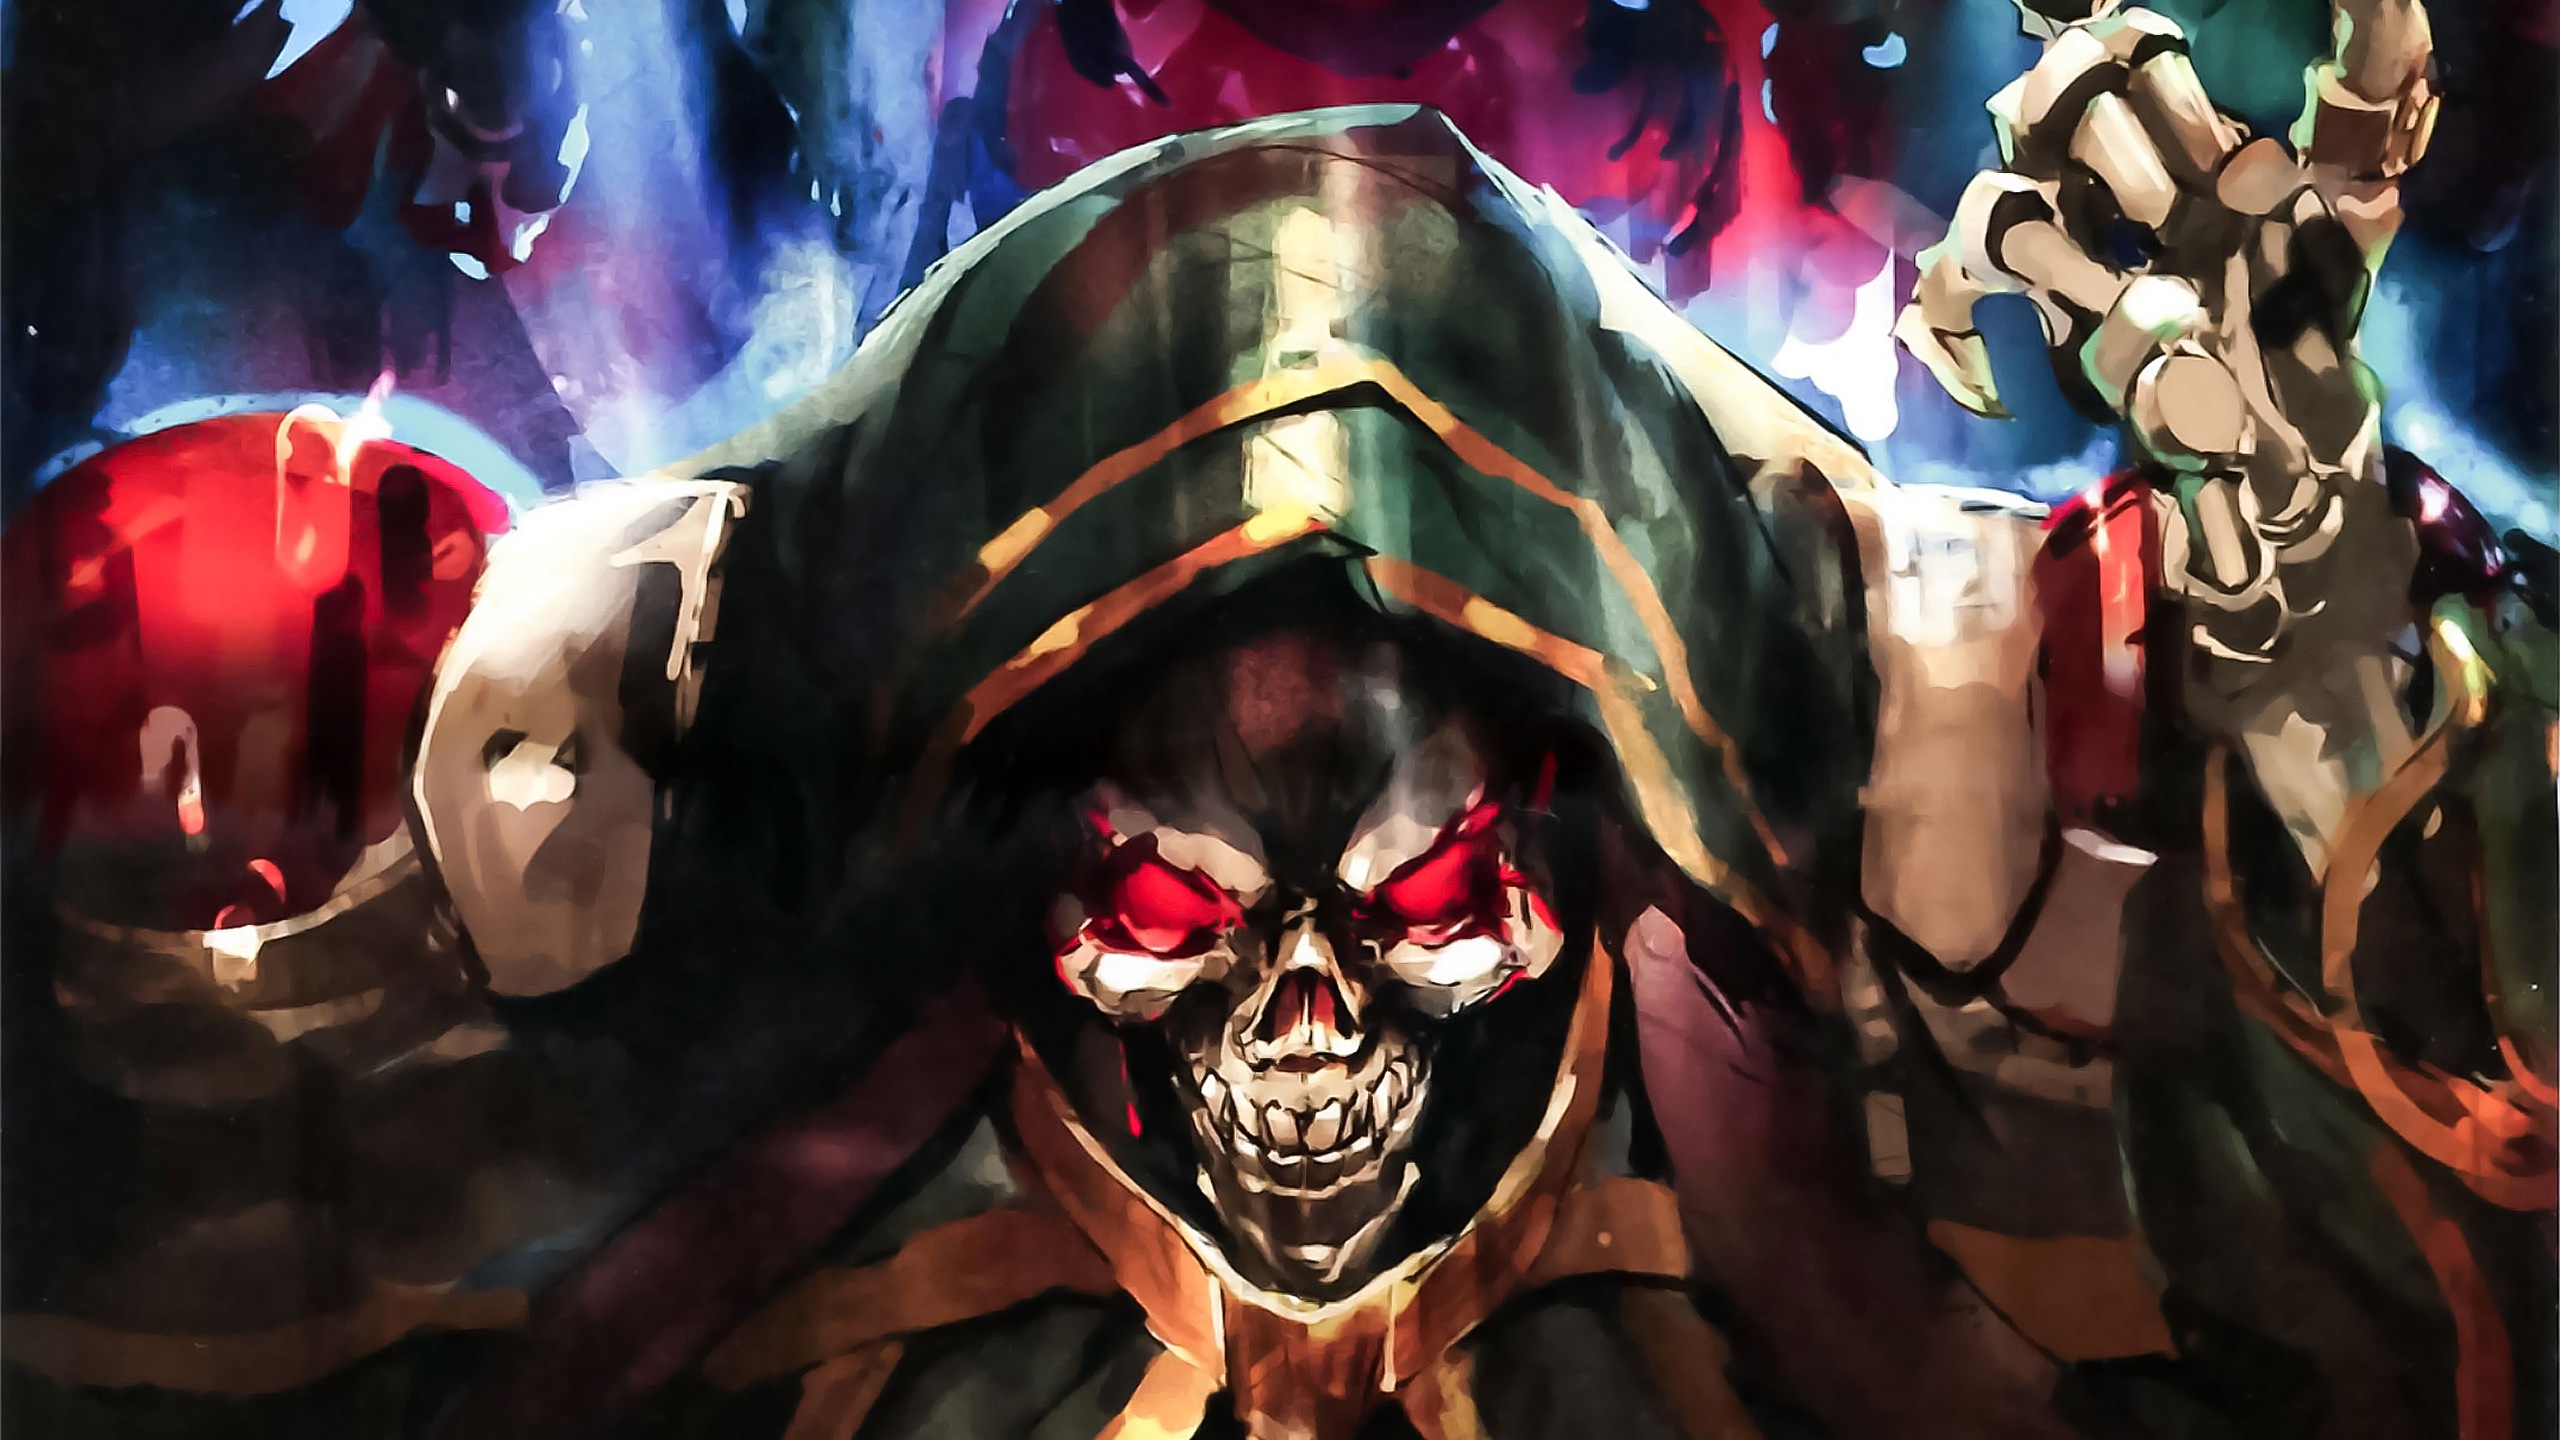 Free Download Overlord Wallpapers Pictures Images 2560x1440 For Your Desktop Mobile Tablet Explore 77 Overlord Wallpaper Overlord Anime Wallpaper Overlord Albedo Wallpaper